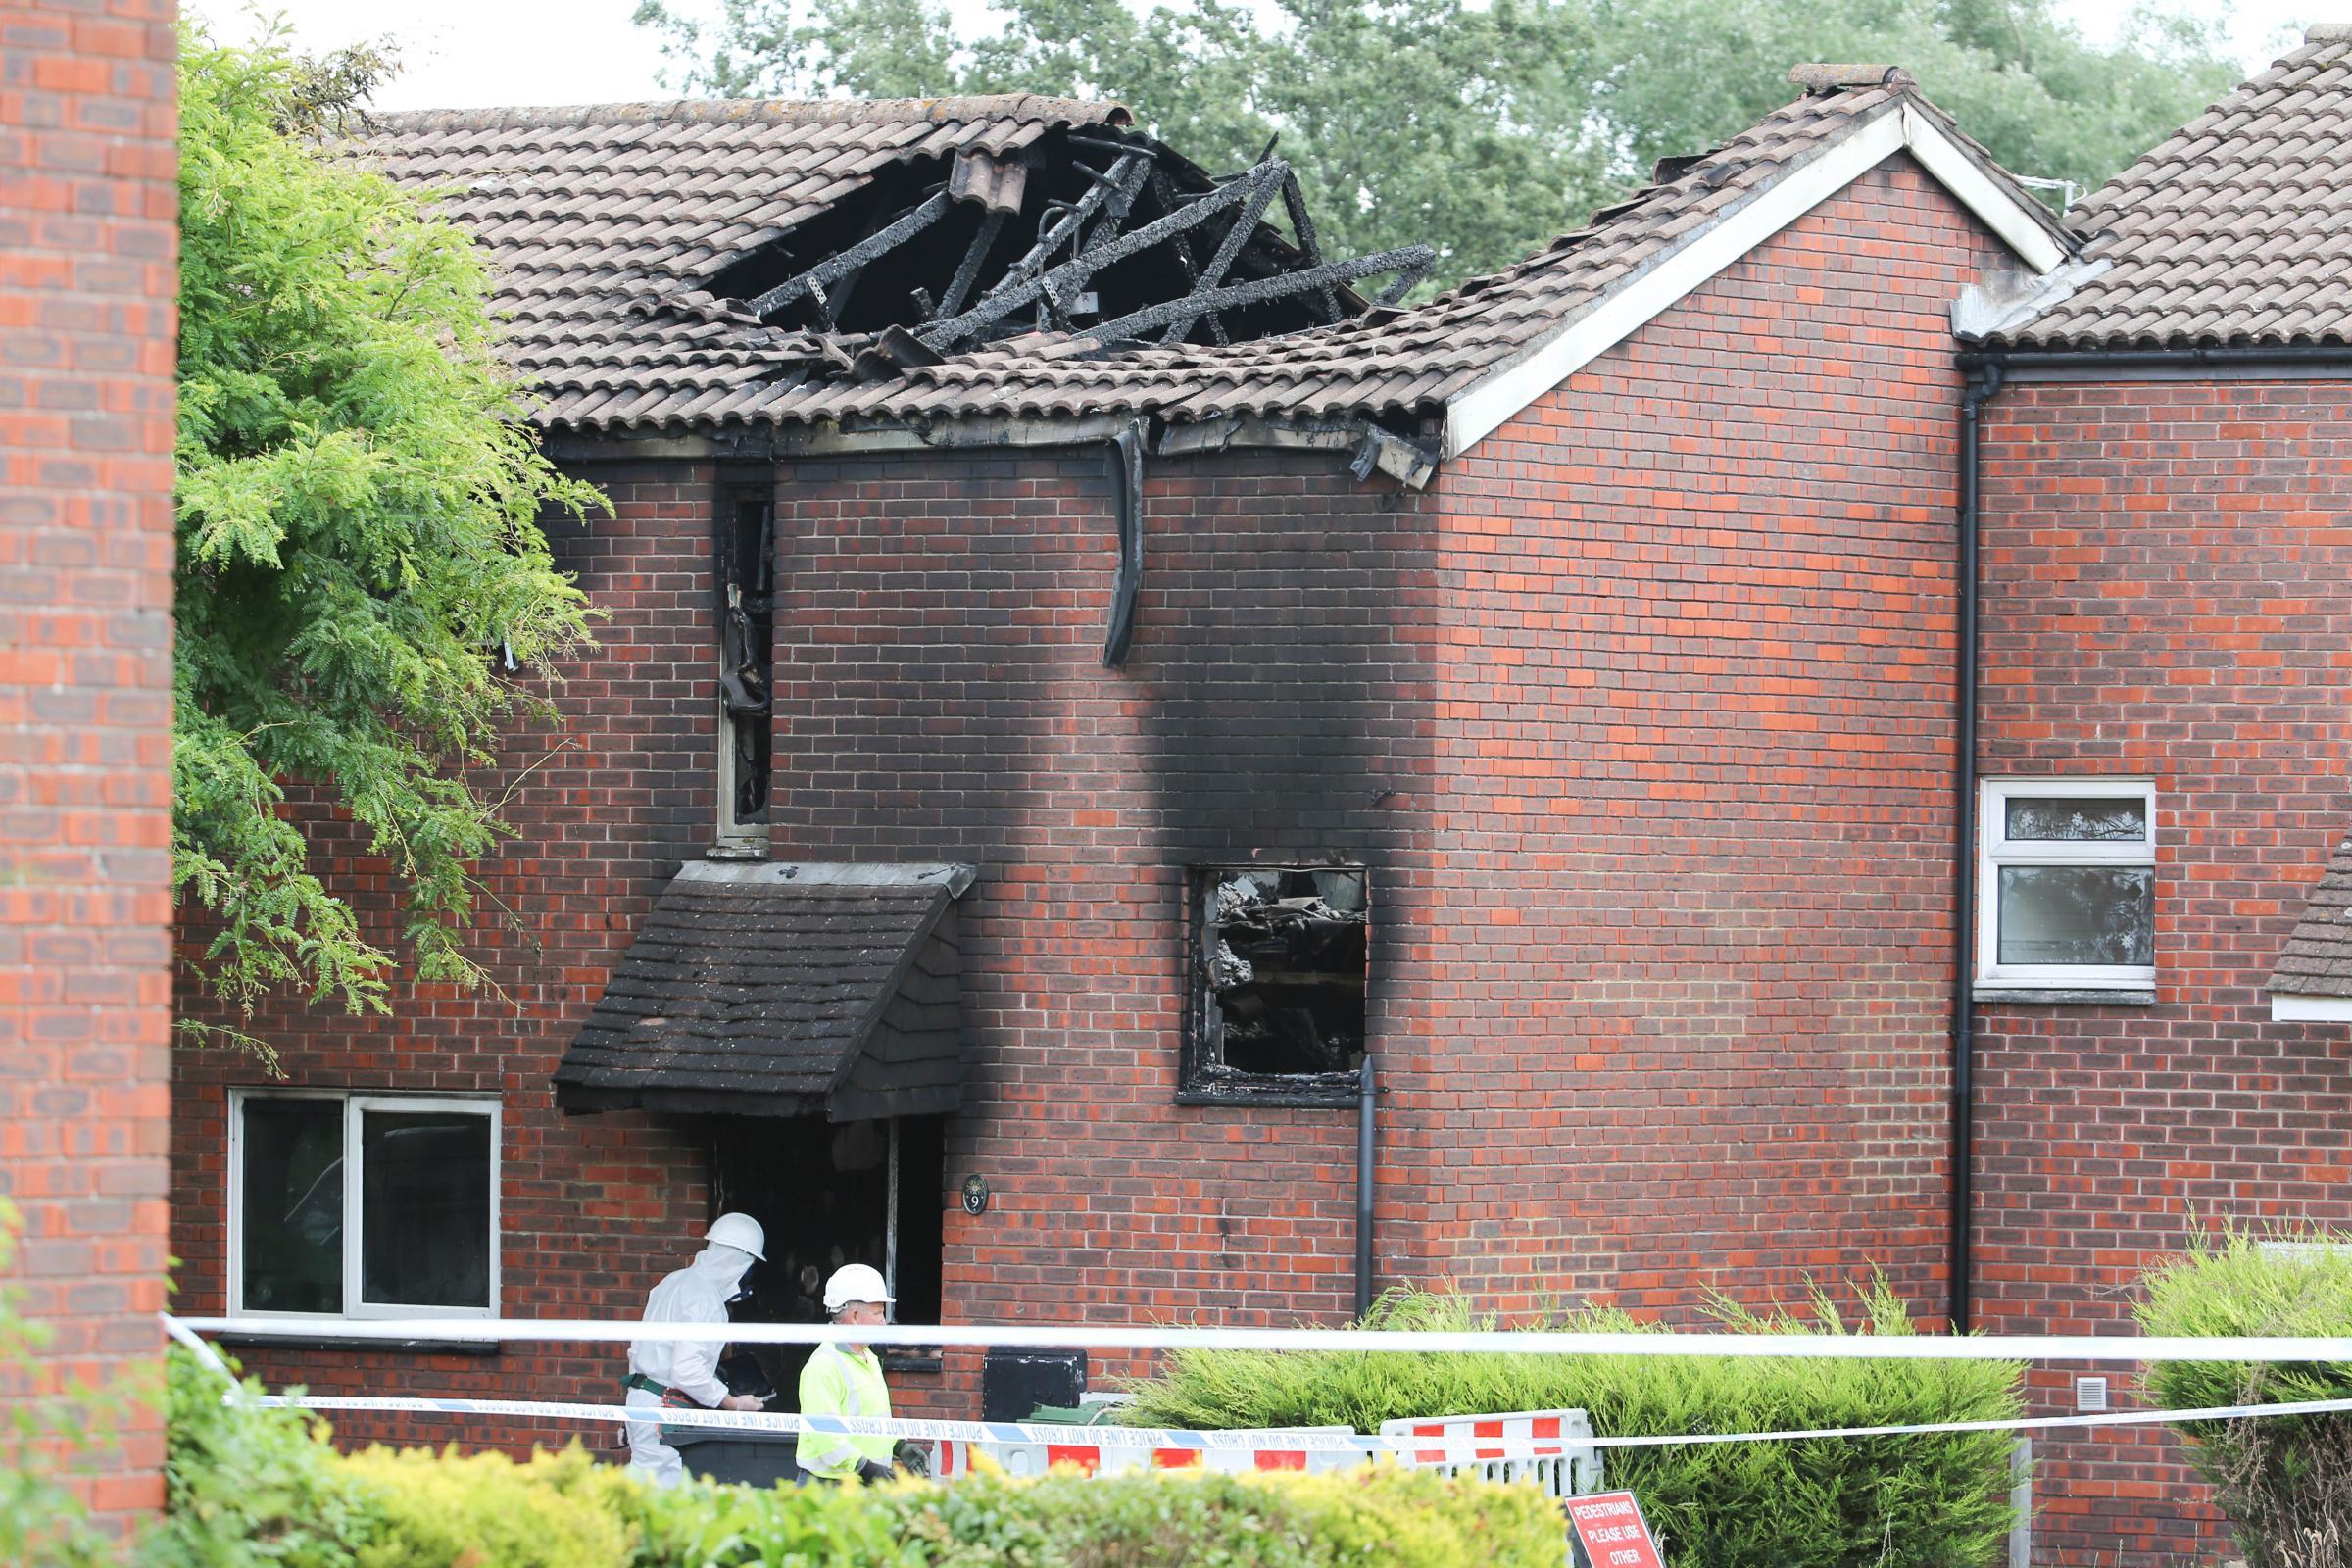 The scene of the fire in Croxden Way, Eastbourne in July 2018